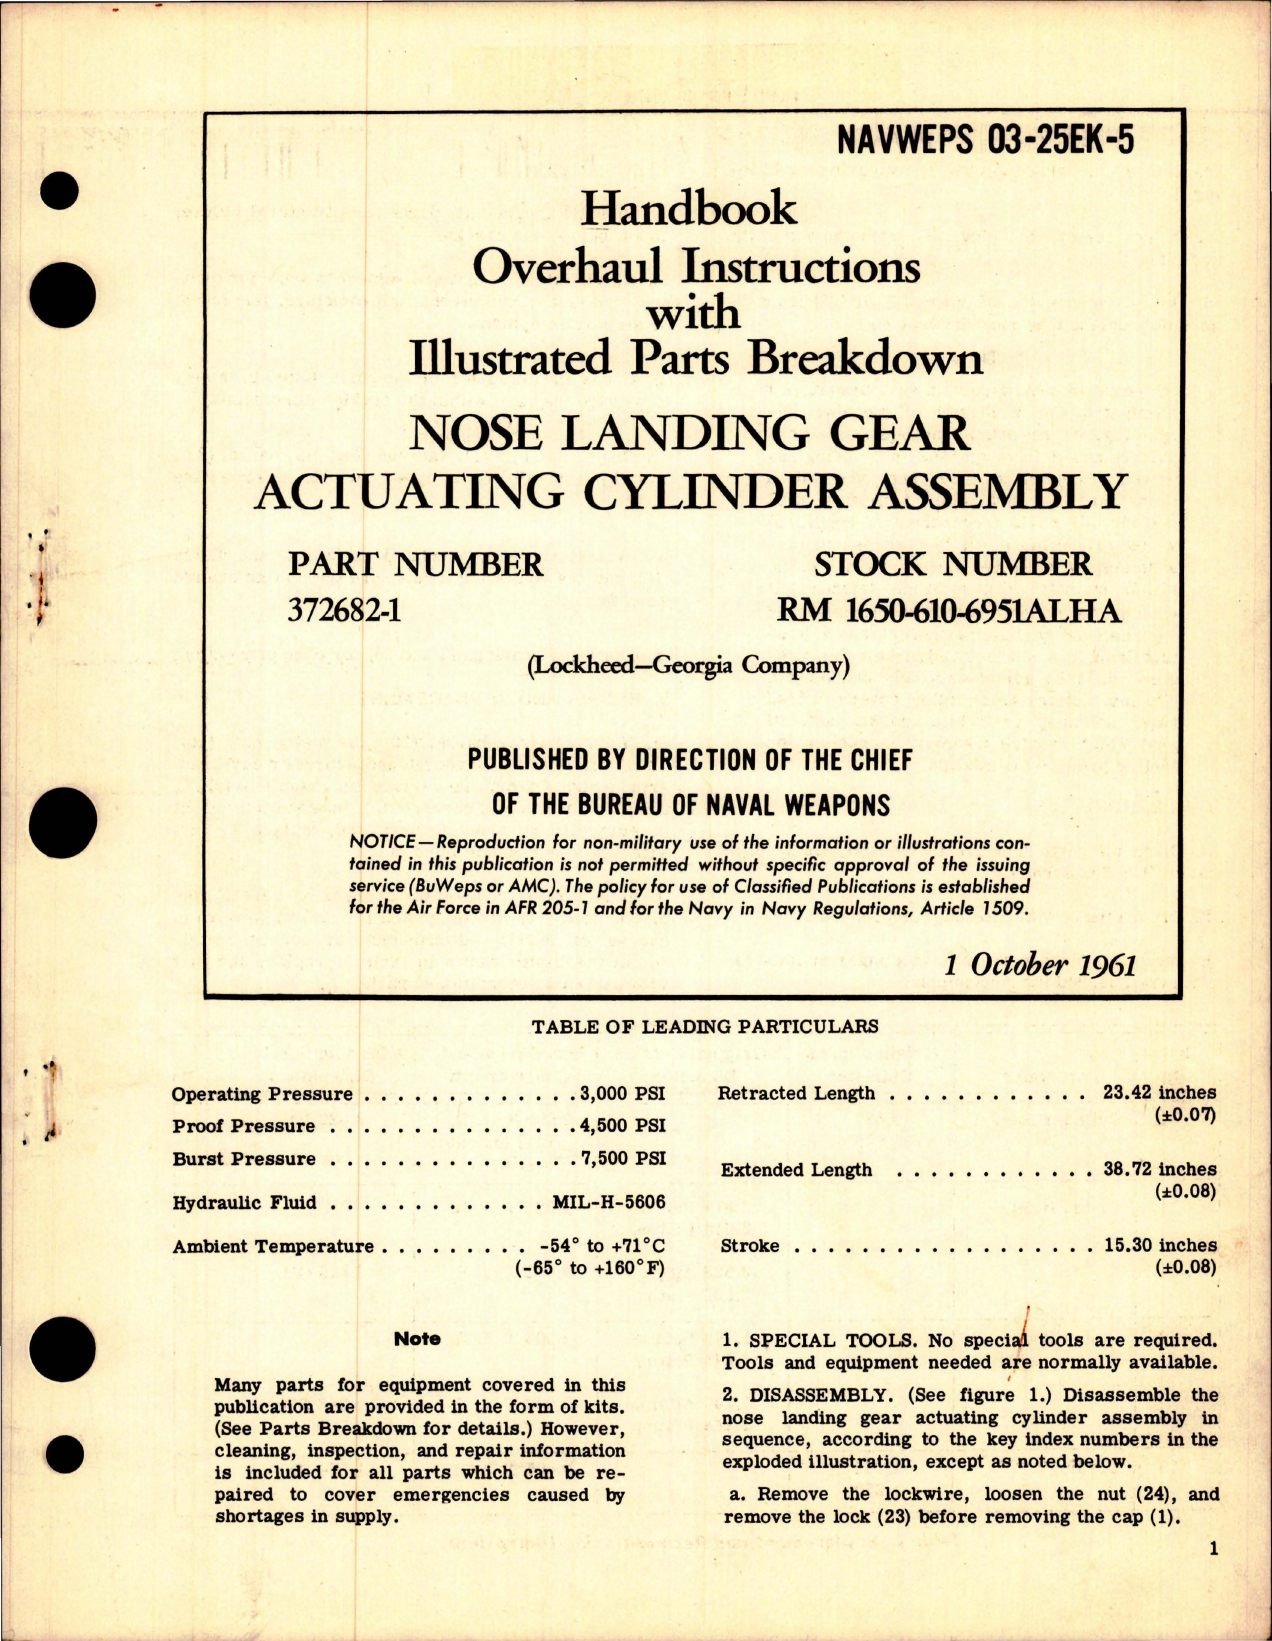 Sample page 1 from AirCorps Library document: Overhaul Instructions with Illustrated Parts for Nose Landing Gear Actuating Cylinder Assembly - Part 372682-1